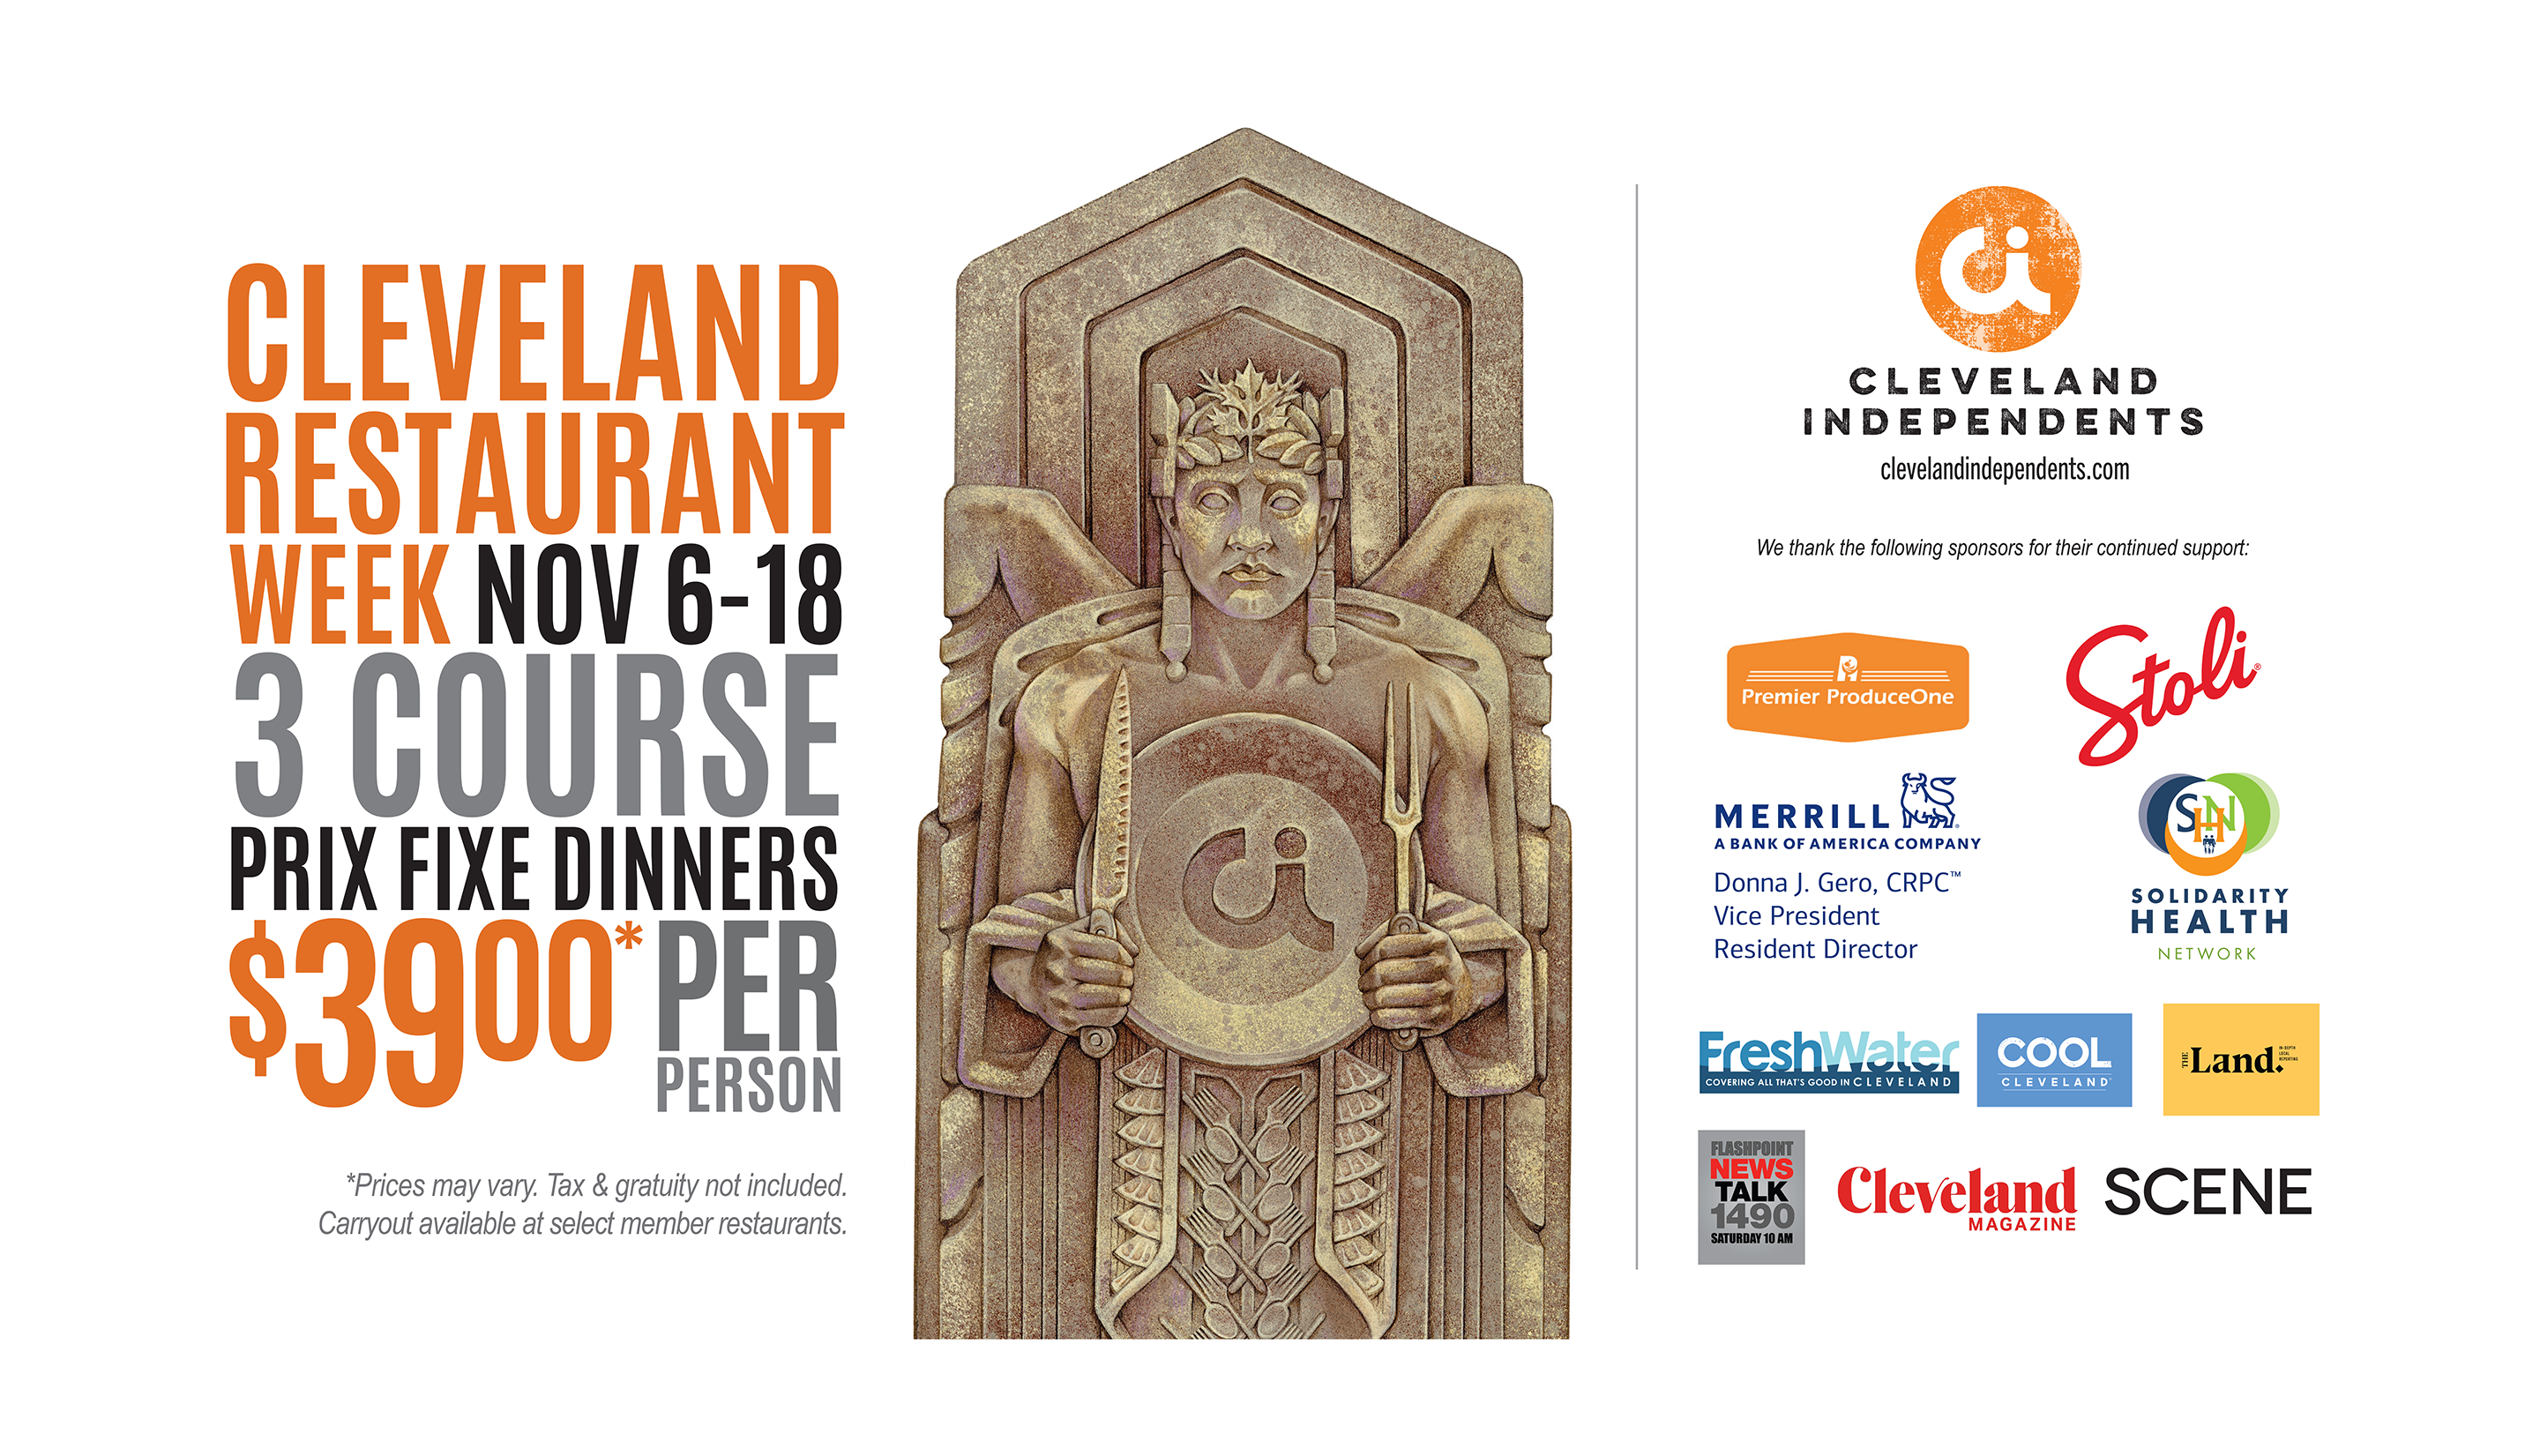 Cleveland Independents Restaurant Week is November 6-18. Join us for three course prix fixe dinners for $39.